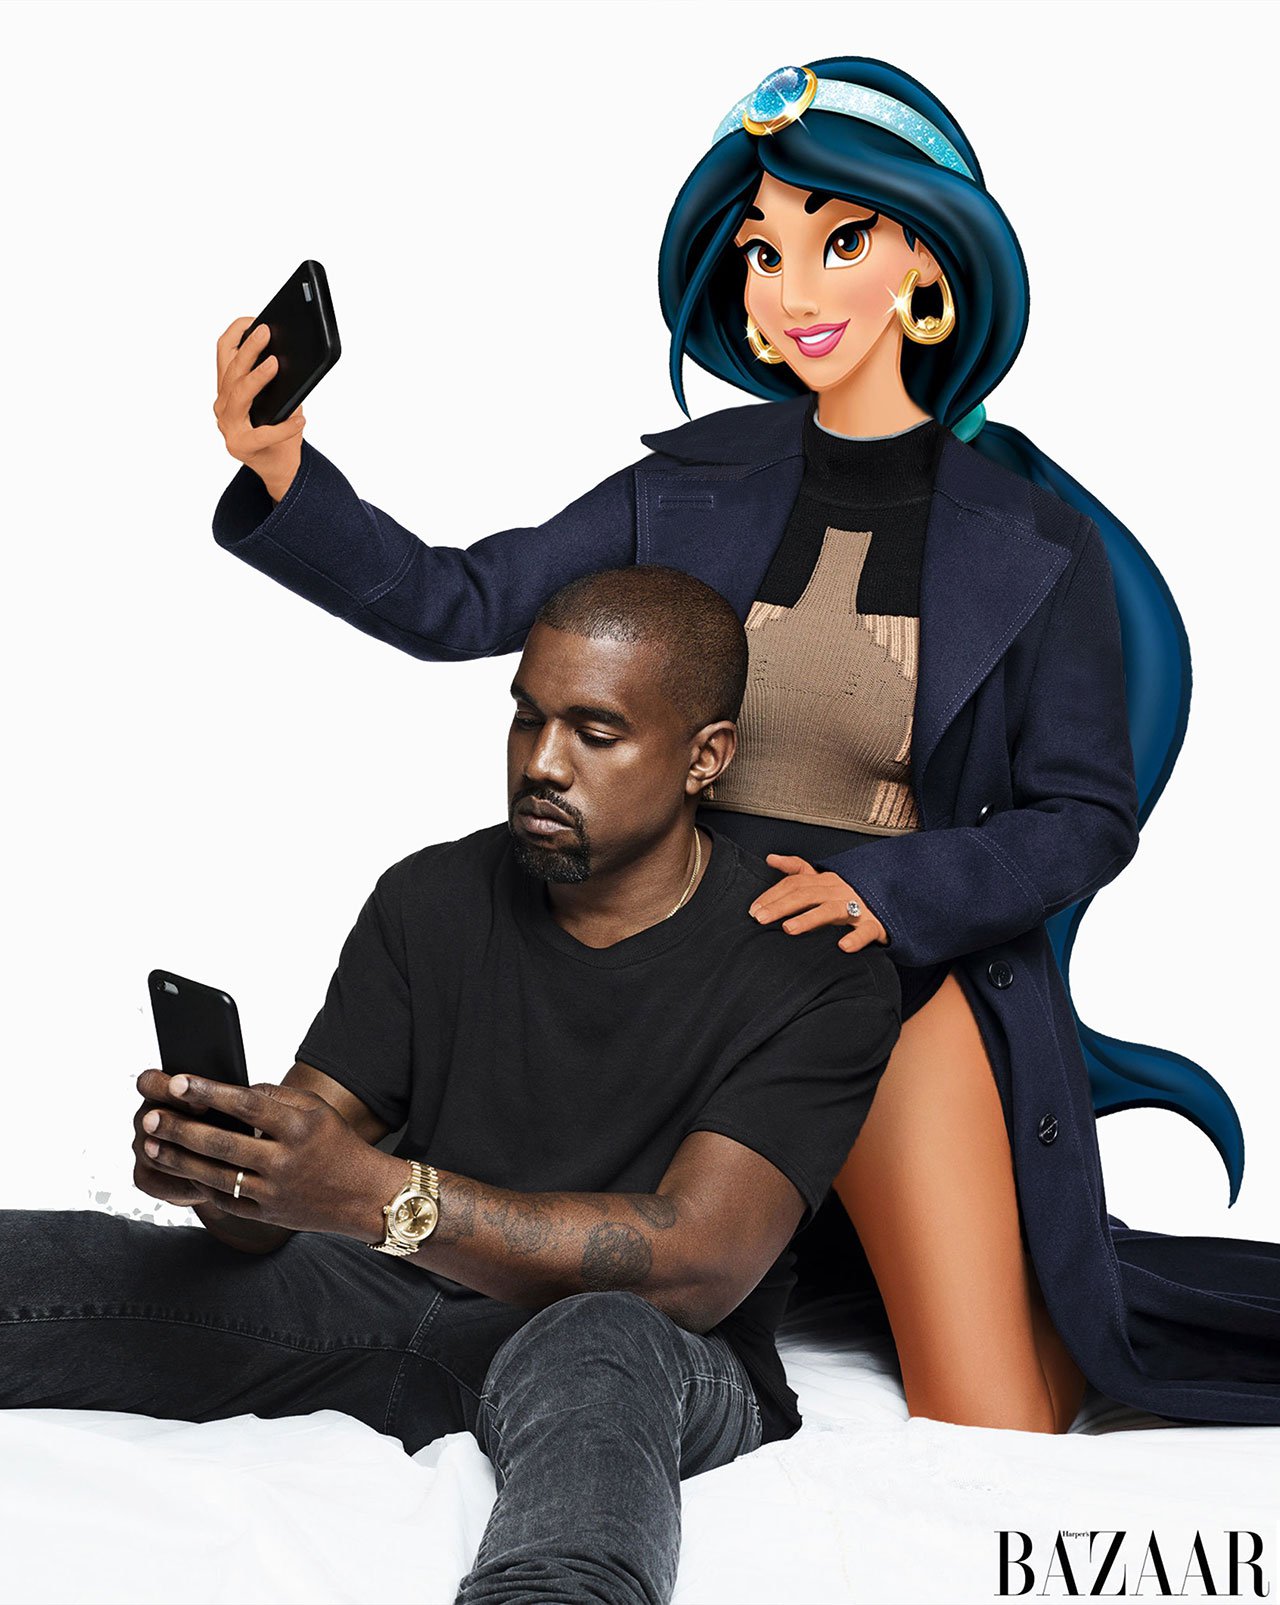 f9_animation_in_reality_by_gregory_masouras_kim_kardashian_as_jasmine_with_kanye_west_harpersbazaarus_september_photographed_by_karl_lagerfeld_yatzer